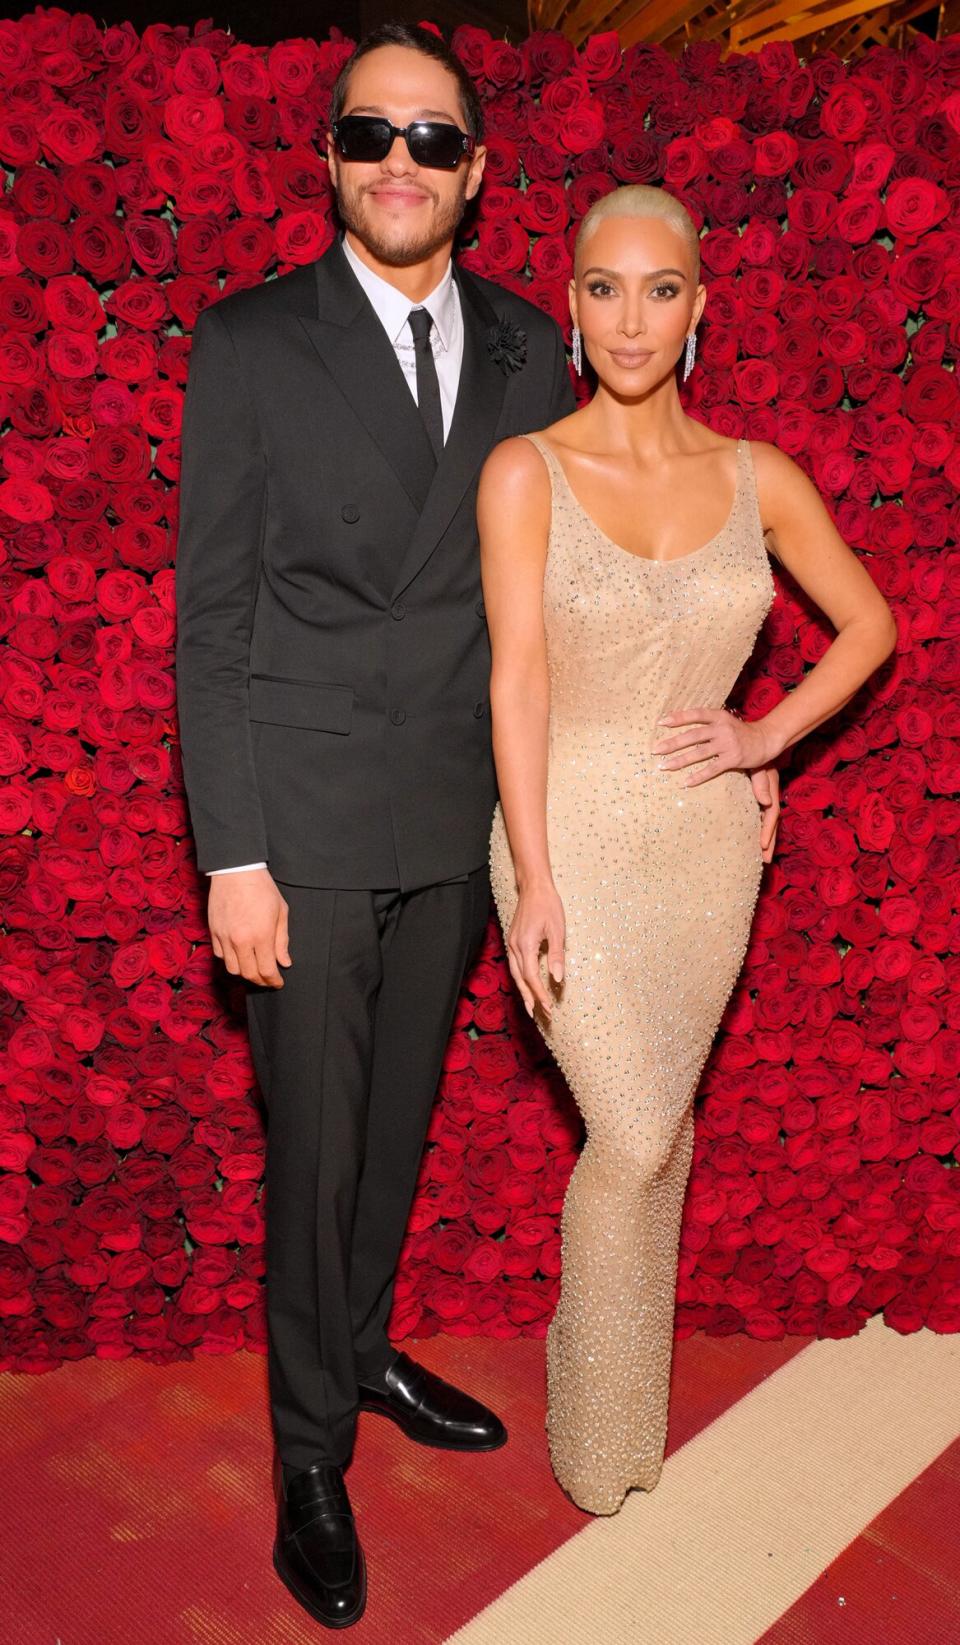 Pete Davidson and Kim Kardashian attend The 2022 Met Gala Celebrating "In America: An Anthology of Fashion" at The Metropolitan Museum of Art on May 02, 2022 in New York City